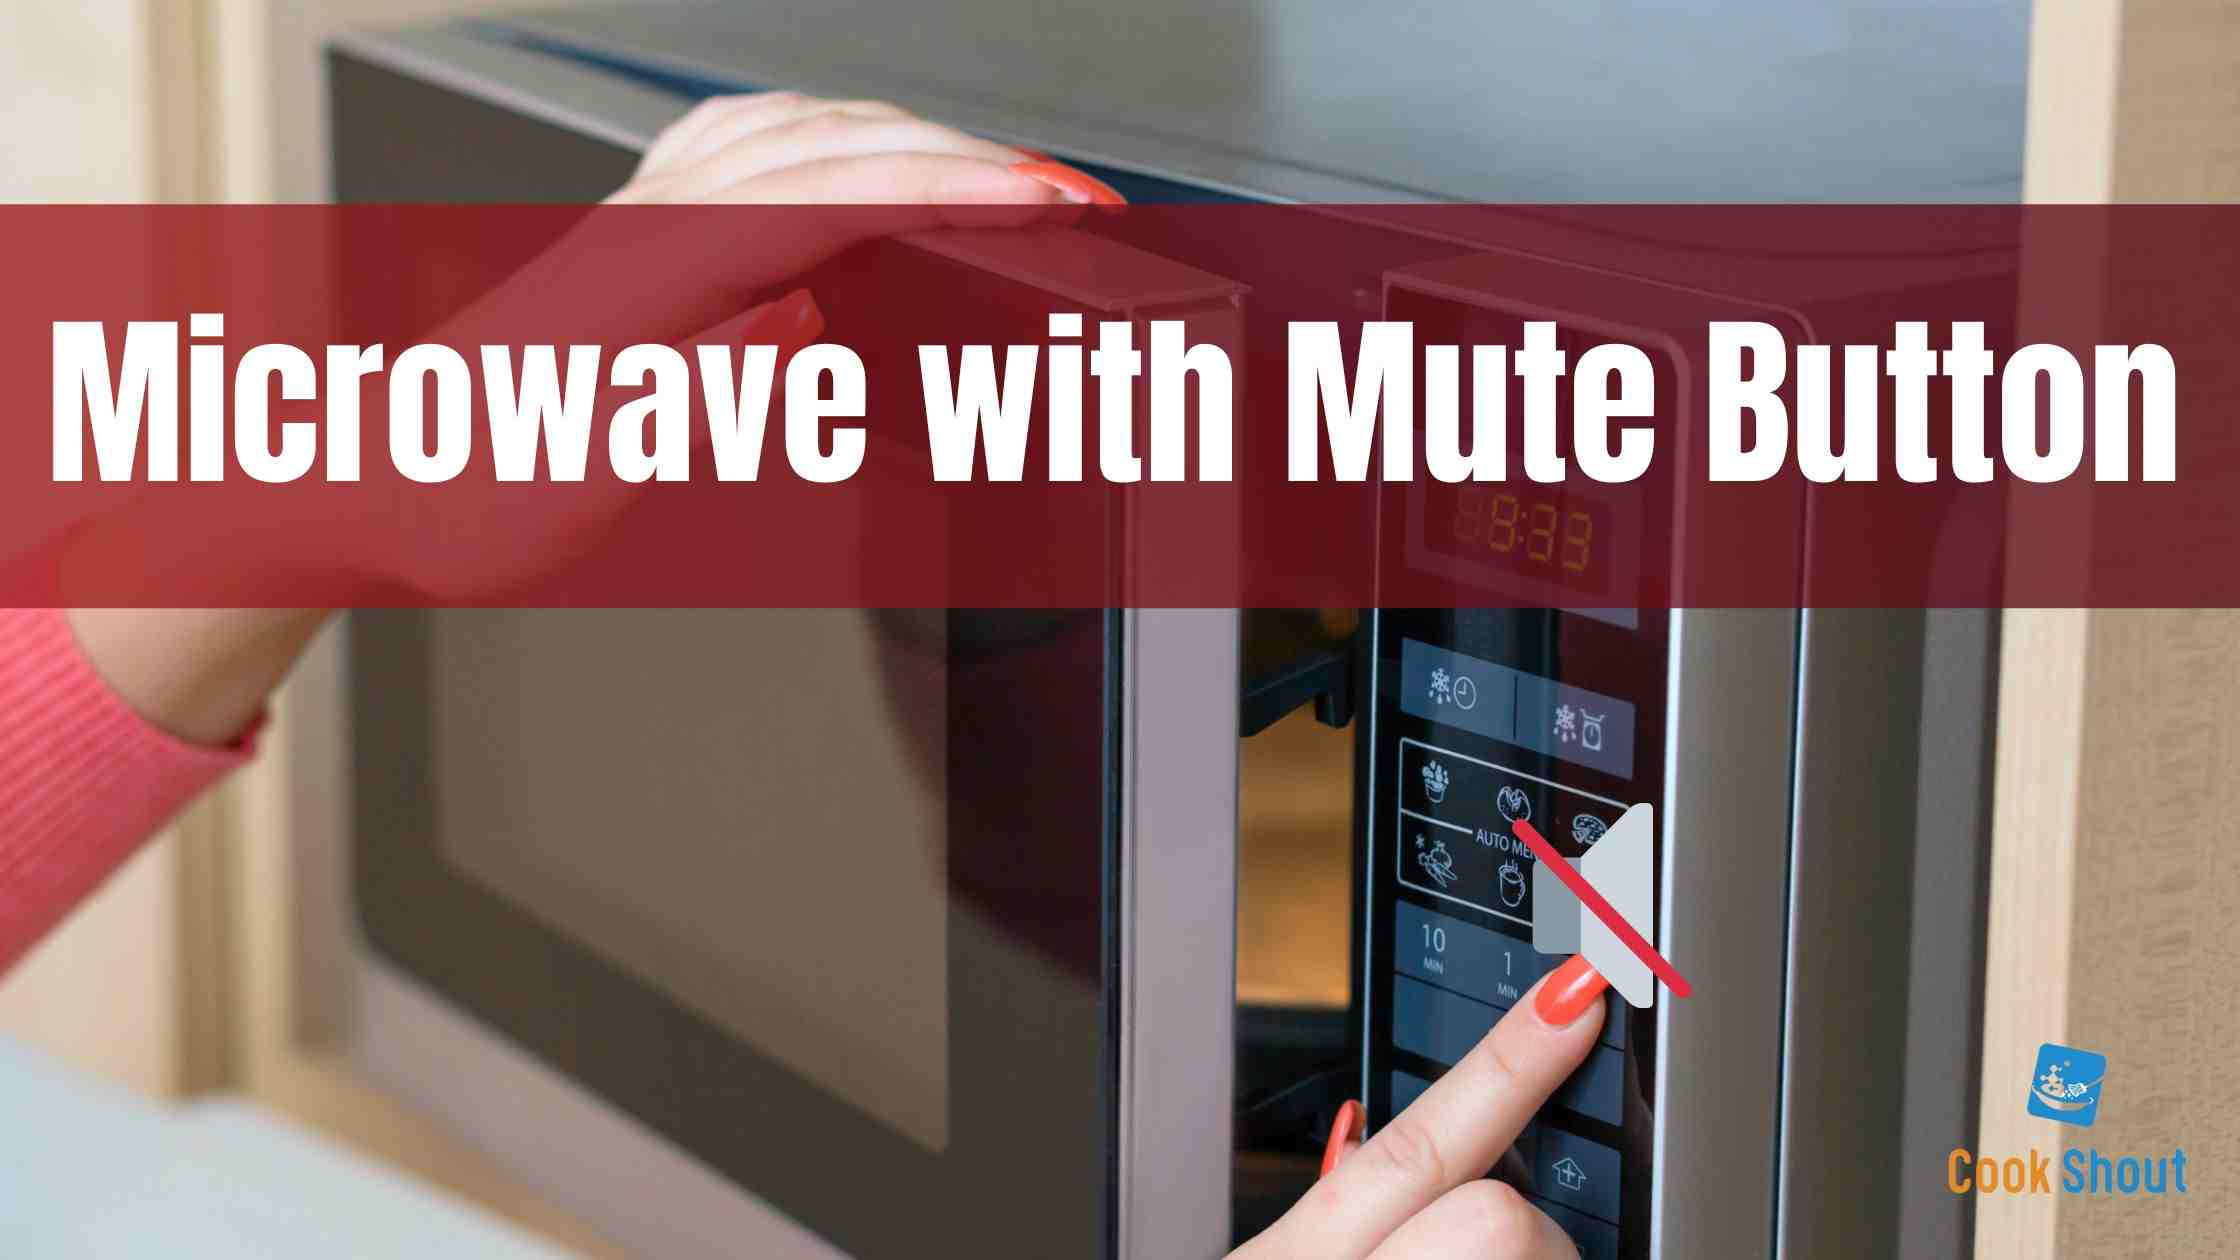 Microwave with Mute Button